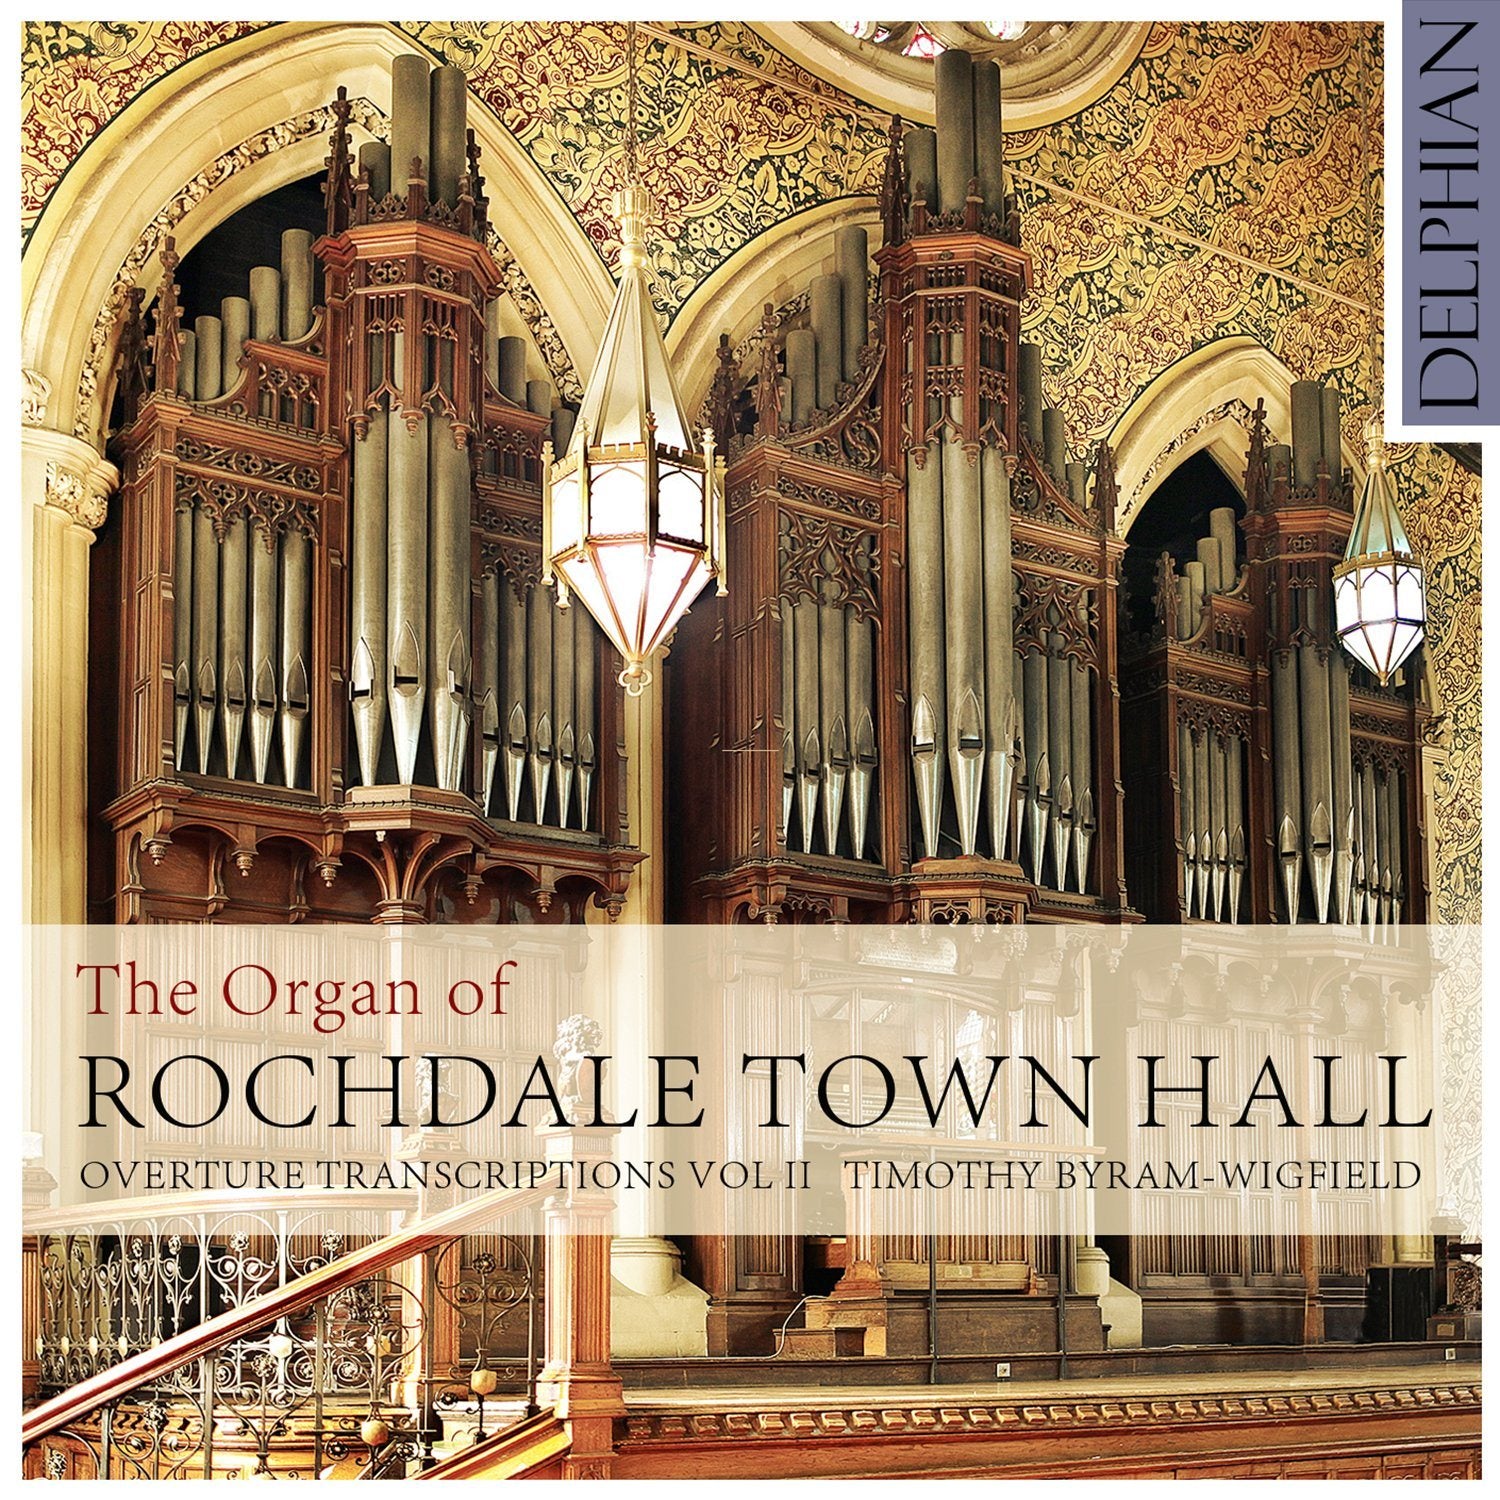 The Organ of Rochdale Town Hall (Overture Transcriptions Vol II)